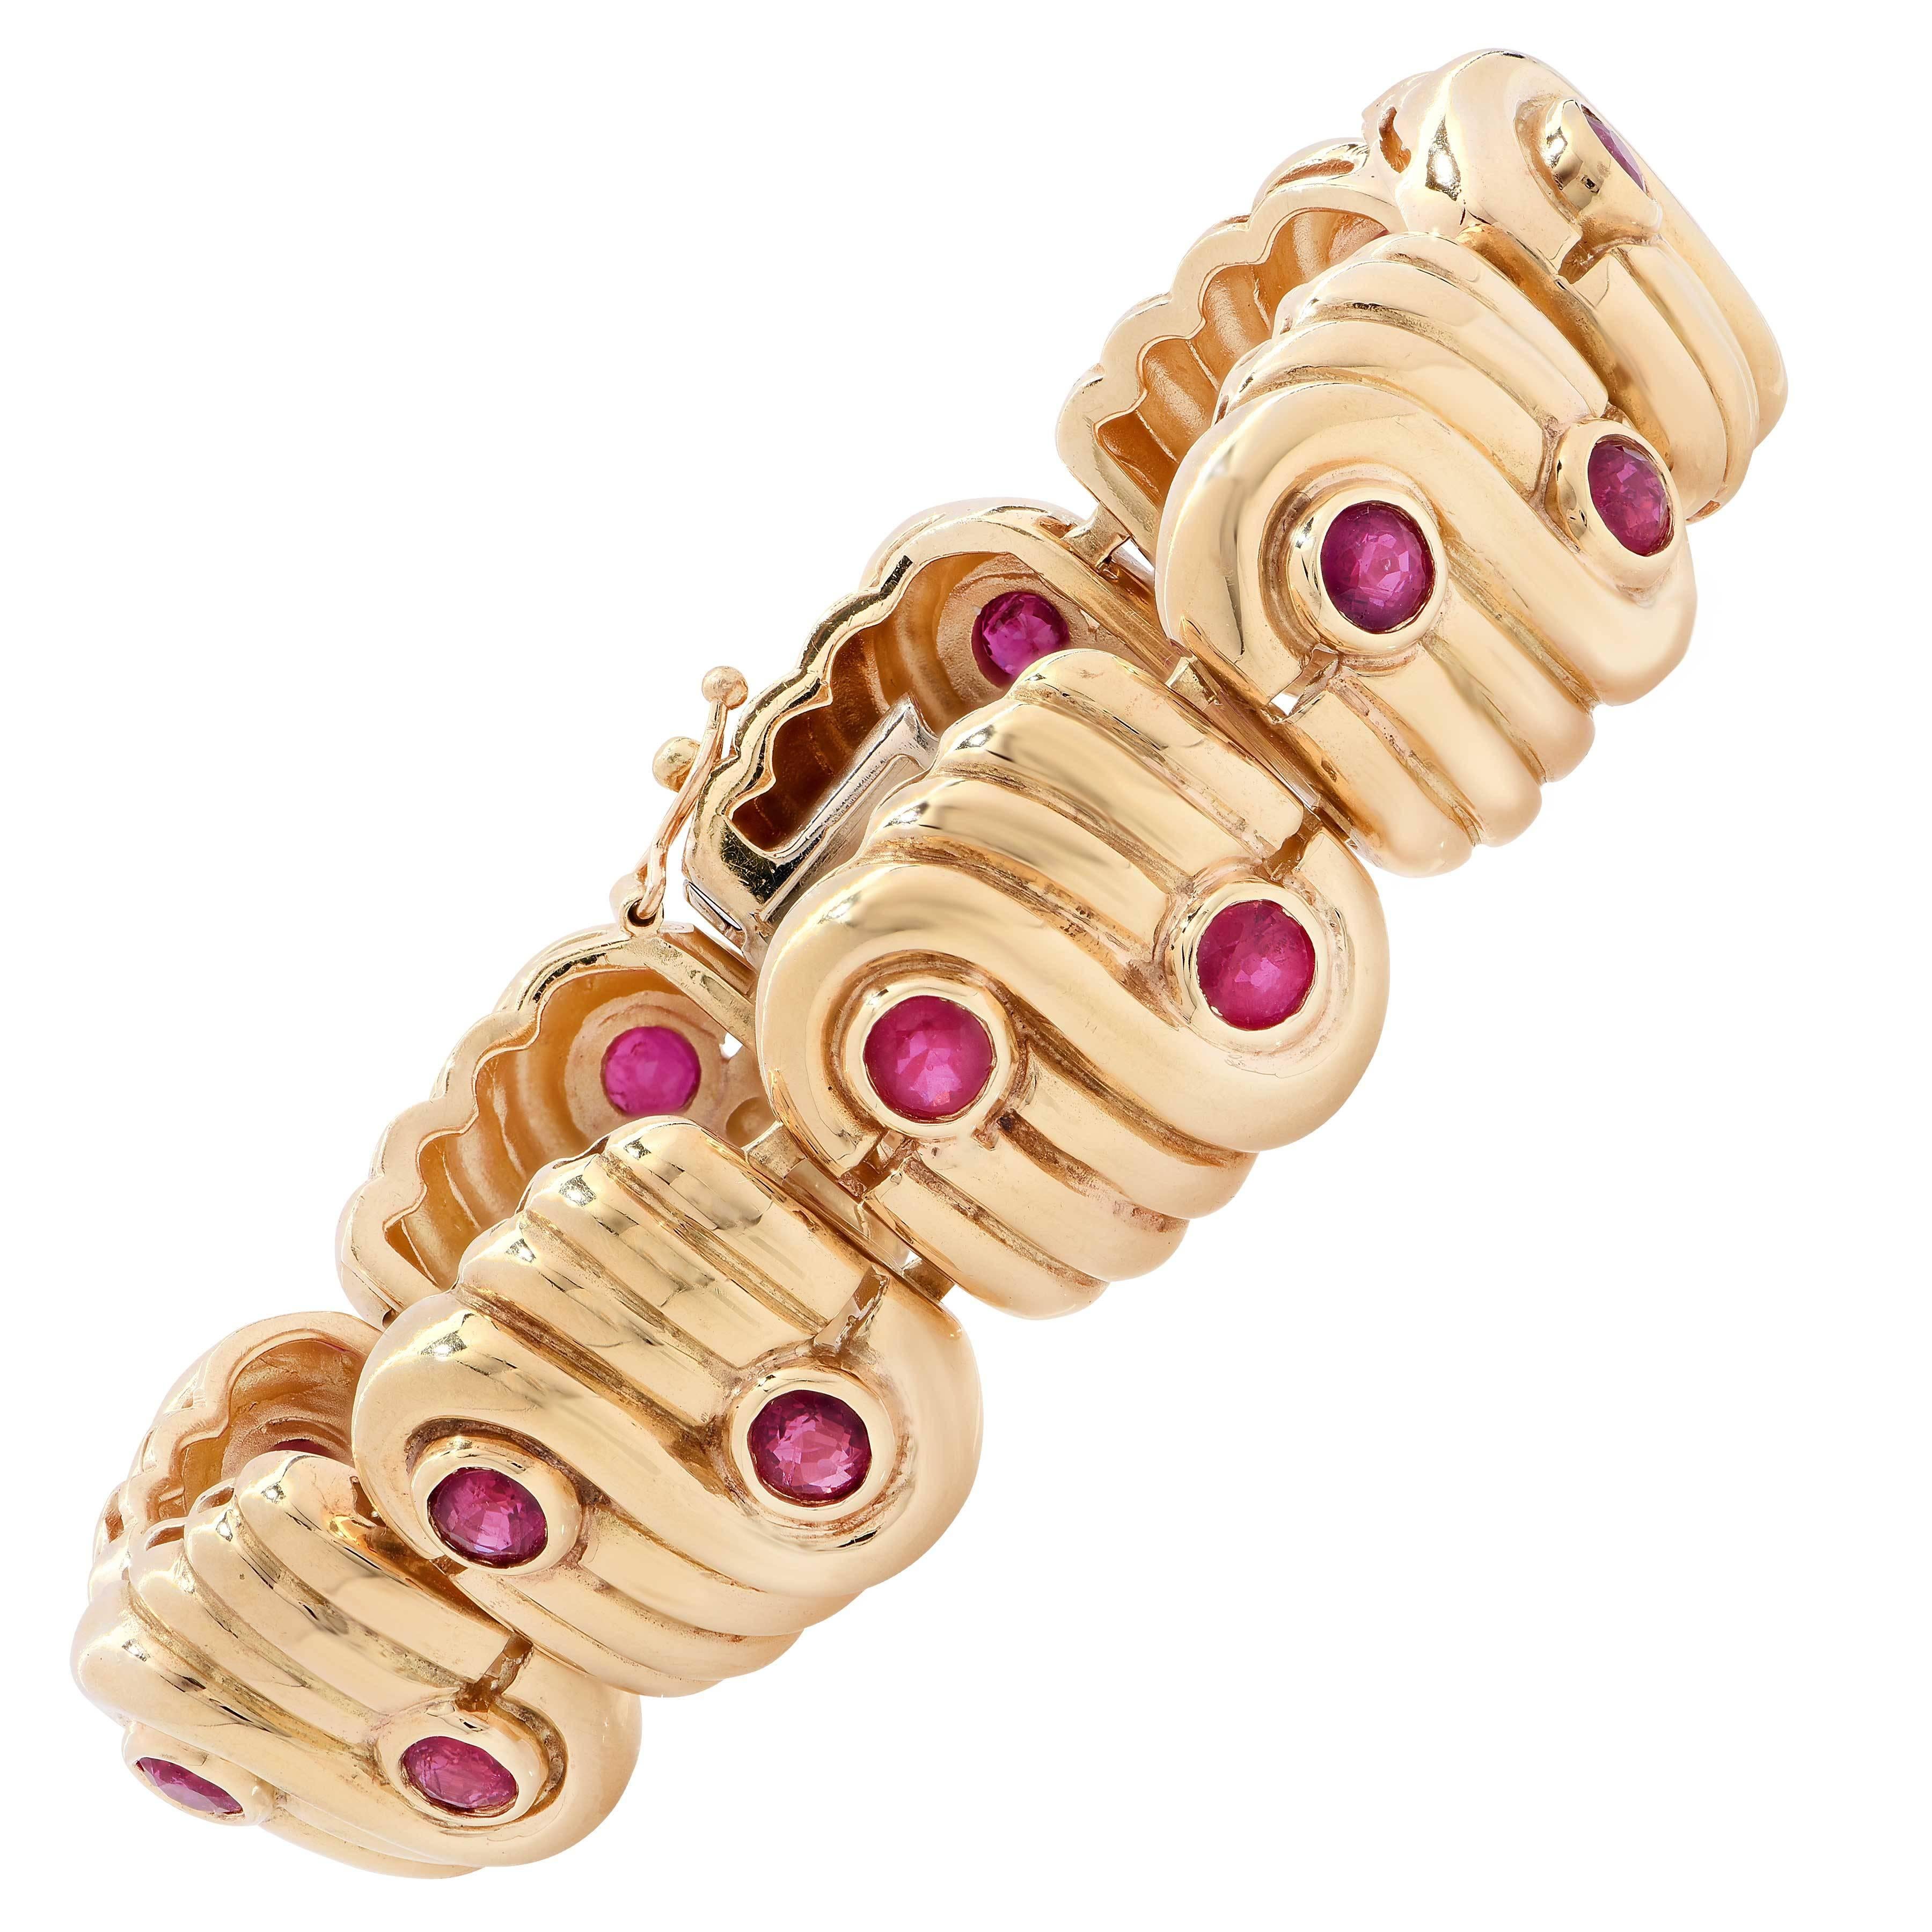 1980's Retro Design Bracelet featuring 18 bezel set rubies weighing approximately 5.40 carats. Each of the 9 high polished links has a swirling design set with 2 rubies.  
Total weight is 75 grams. 
Length of bracelet is 6 3/4 inches.

Metal Type: